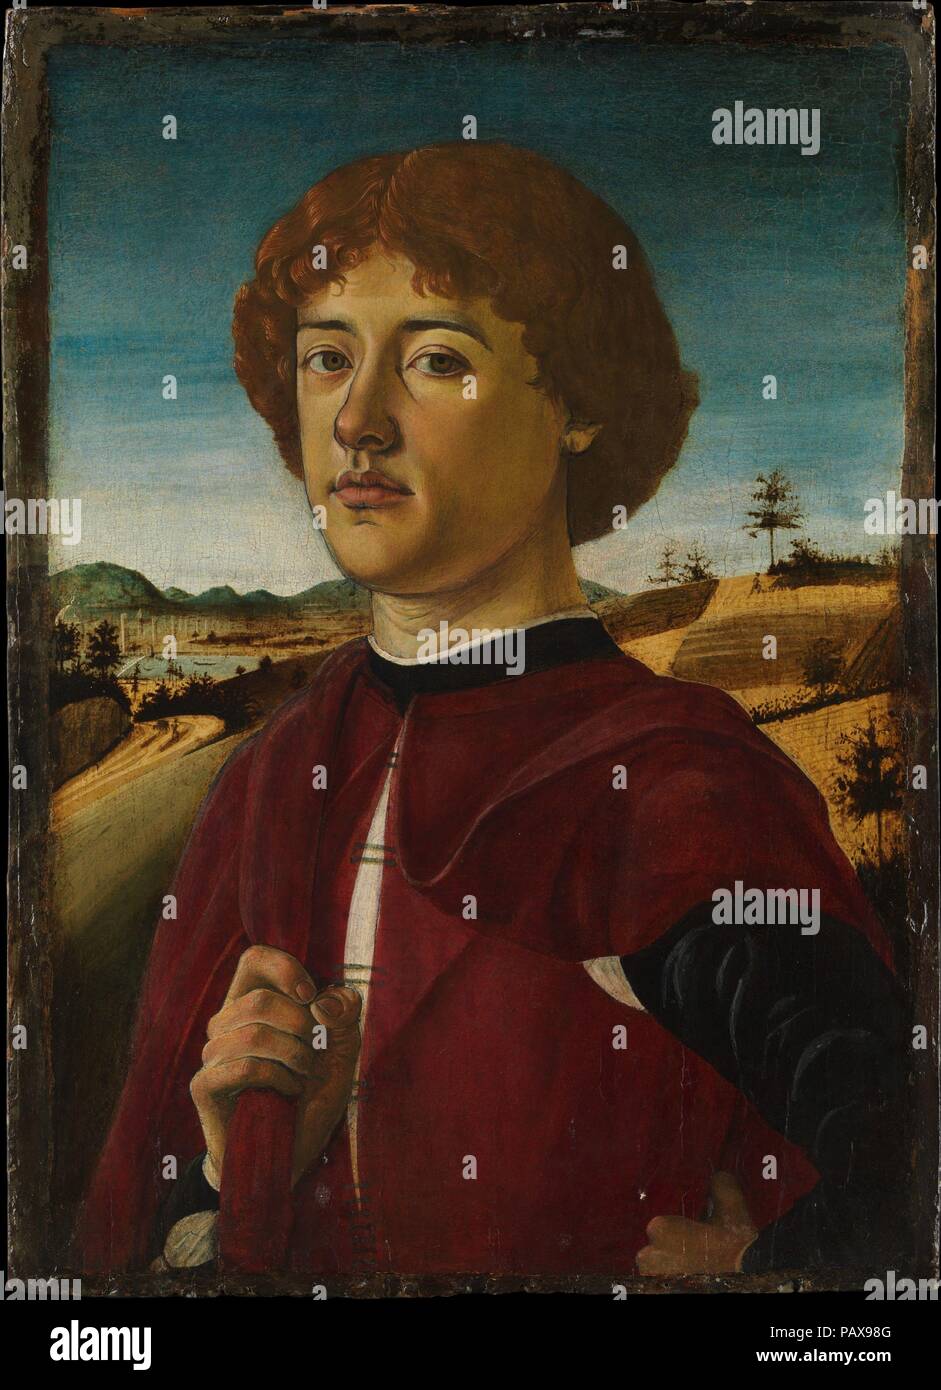 Portrait of a Young Man. Artist: Biagio d'Antonio (Italian, Florentine, active by 1472-died 1516). Dimensions: Overall 21 3/8 x 15 1/2 in. (54.3 x 39.4 cm); painted surface 20 1/4 x 14 1/4 in. (51.4 x 36.2 cm). Date: probably ca. 1470.  This is Biagio d'Antonio's most distinguished portrait, and was painted in around 1470. Its sculptural quality is indebted to the sculptor and painter Verrocchio, who had a deep influence on artists of Biagio's generation. In the background Biagio shows the valley of the Arno river with the city walls and cathedral of Florence. Museum: Metropolitan Museum of Ar Stock Photo